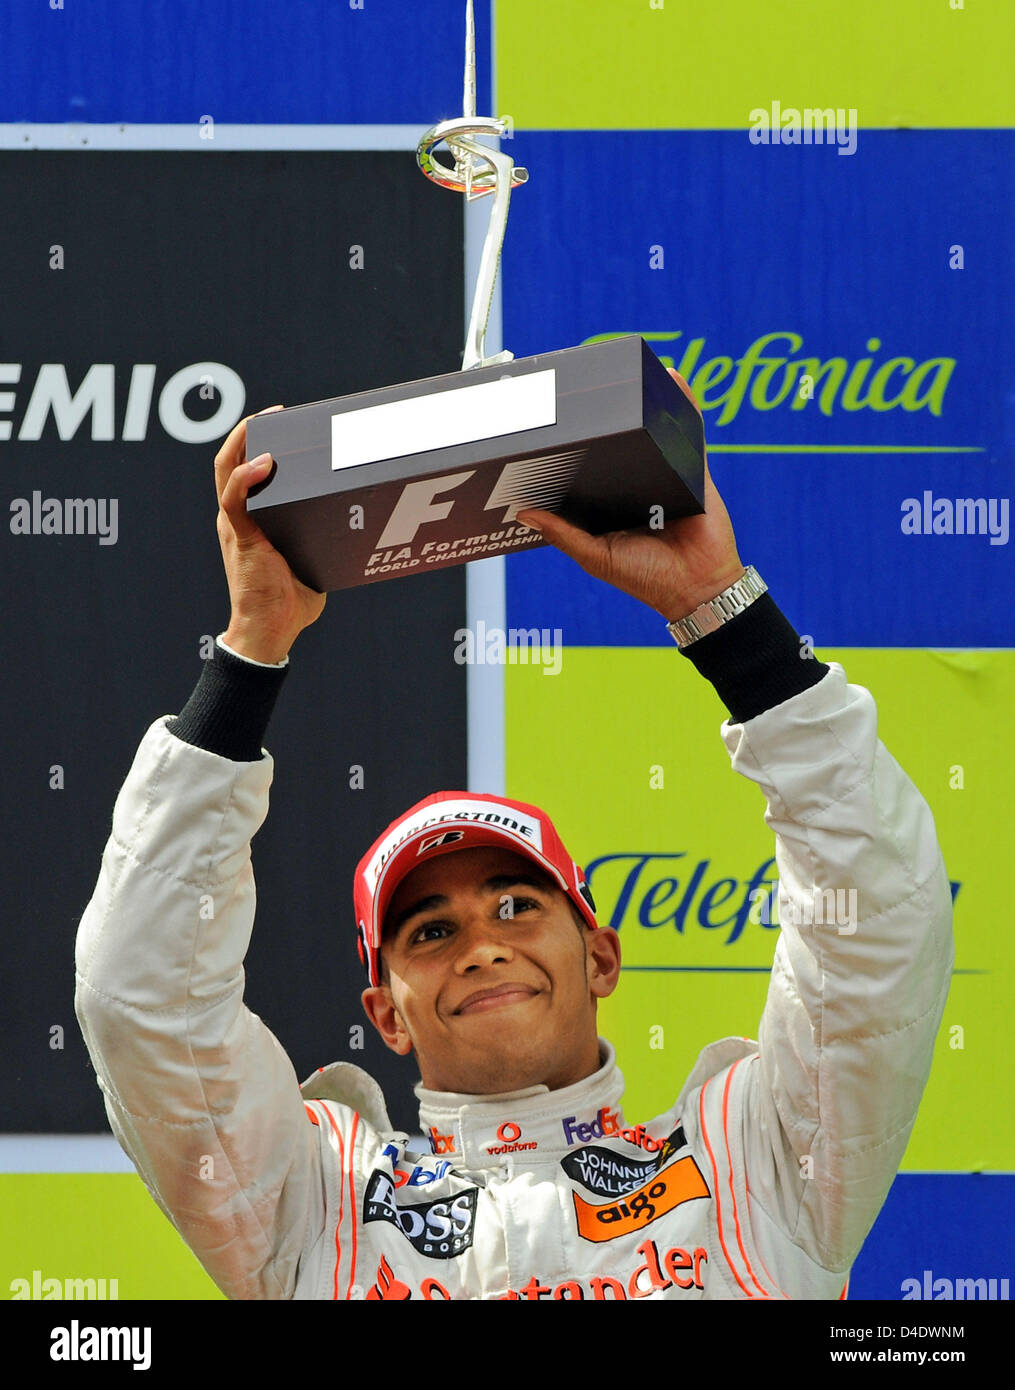 British Formula One driver Lewis Hamilton of McLaren Mercedes lifts his trophy to celebrate the third place in the Formula 1 Grand Prix of Spain at Circuit de Catalunya in Montmelo near Barcelona, Spain, 27 April 2008. Photo: GERO BRELOER Stock Photo